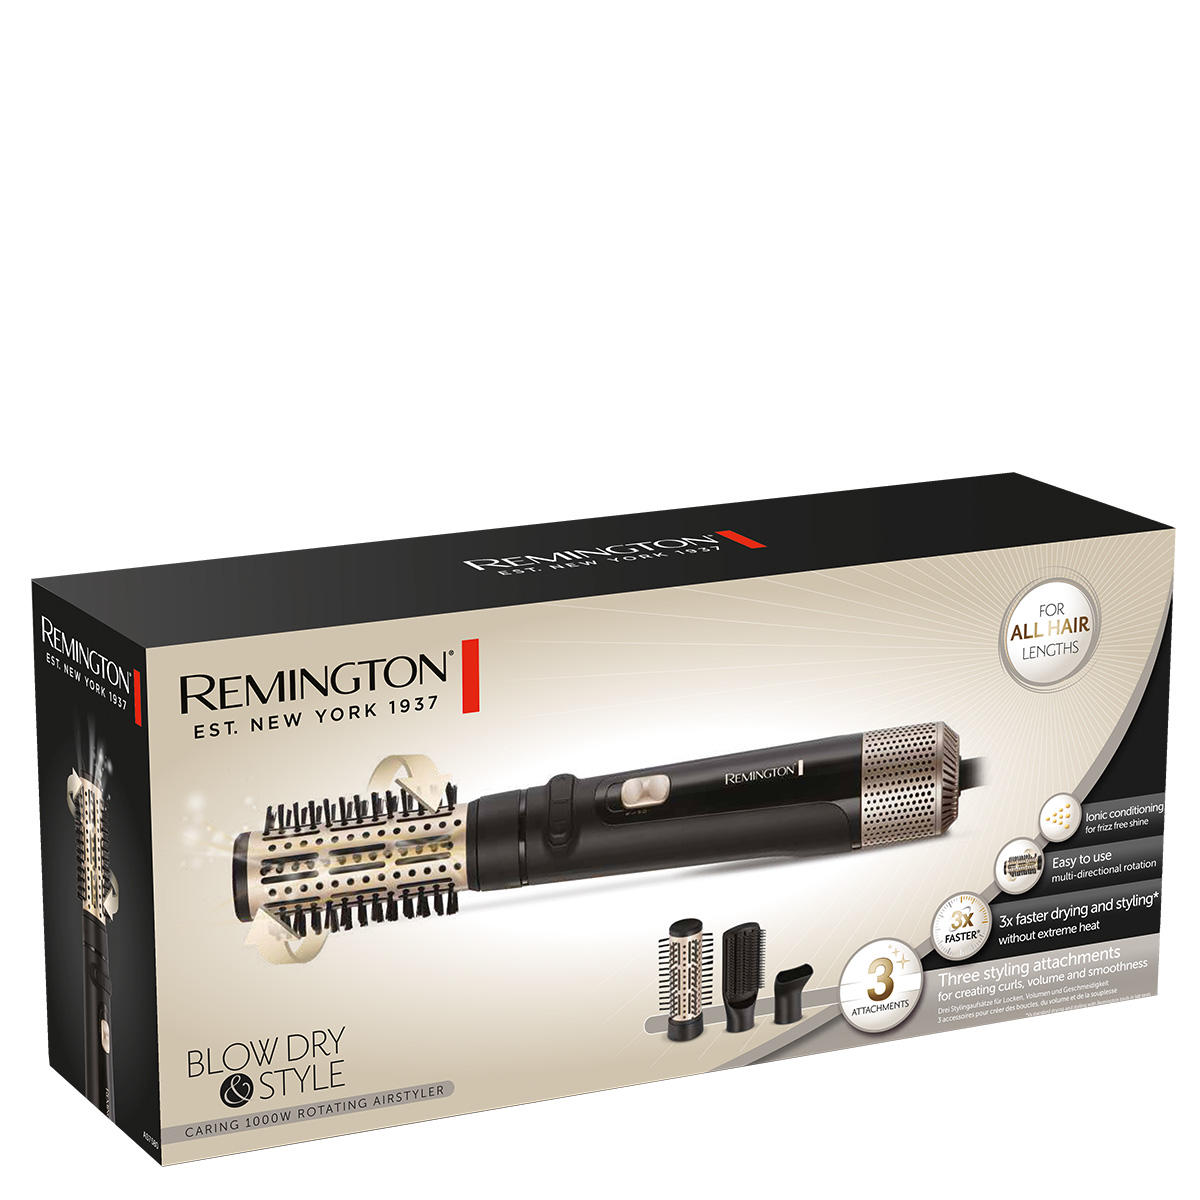 Remington AS7580 Blow Dry & Style Air Styler  - 2